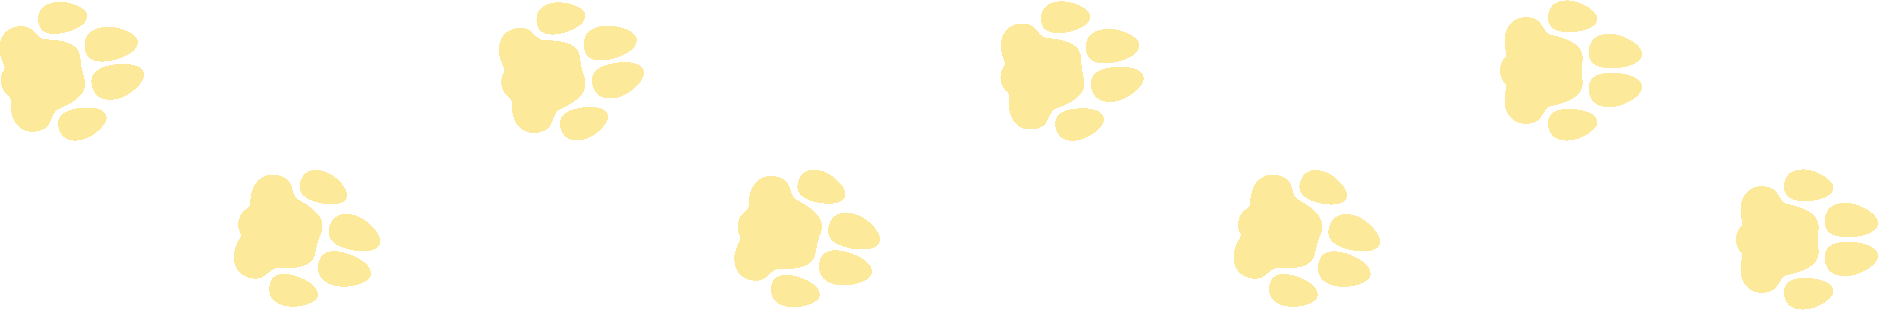 Dog Paw Print - Tamworth - Precious Pets Boarding Kennels & Cattery Centre